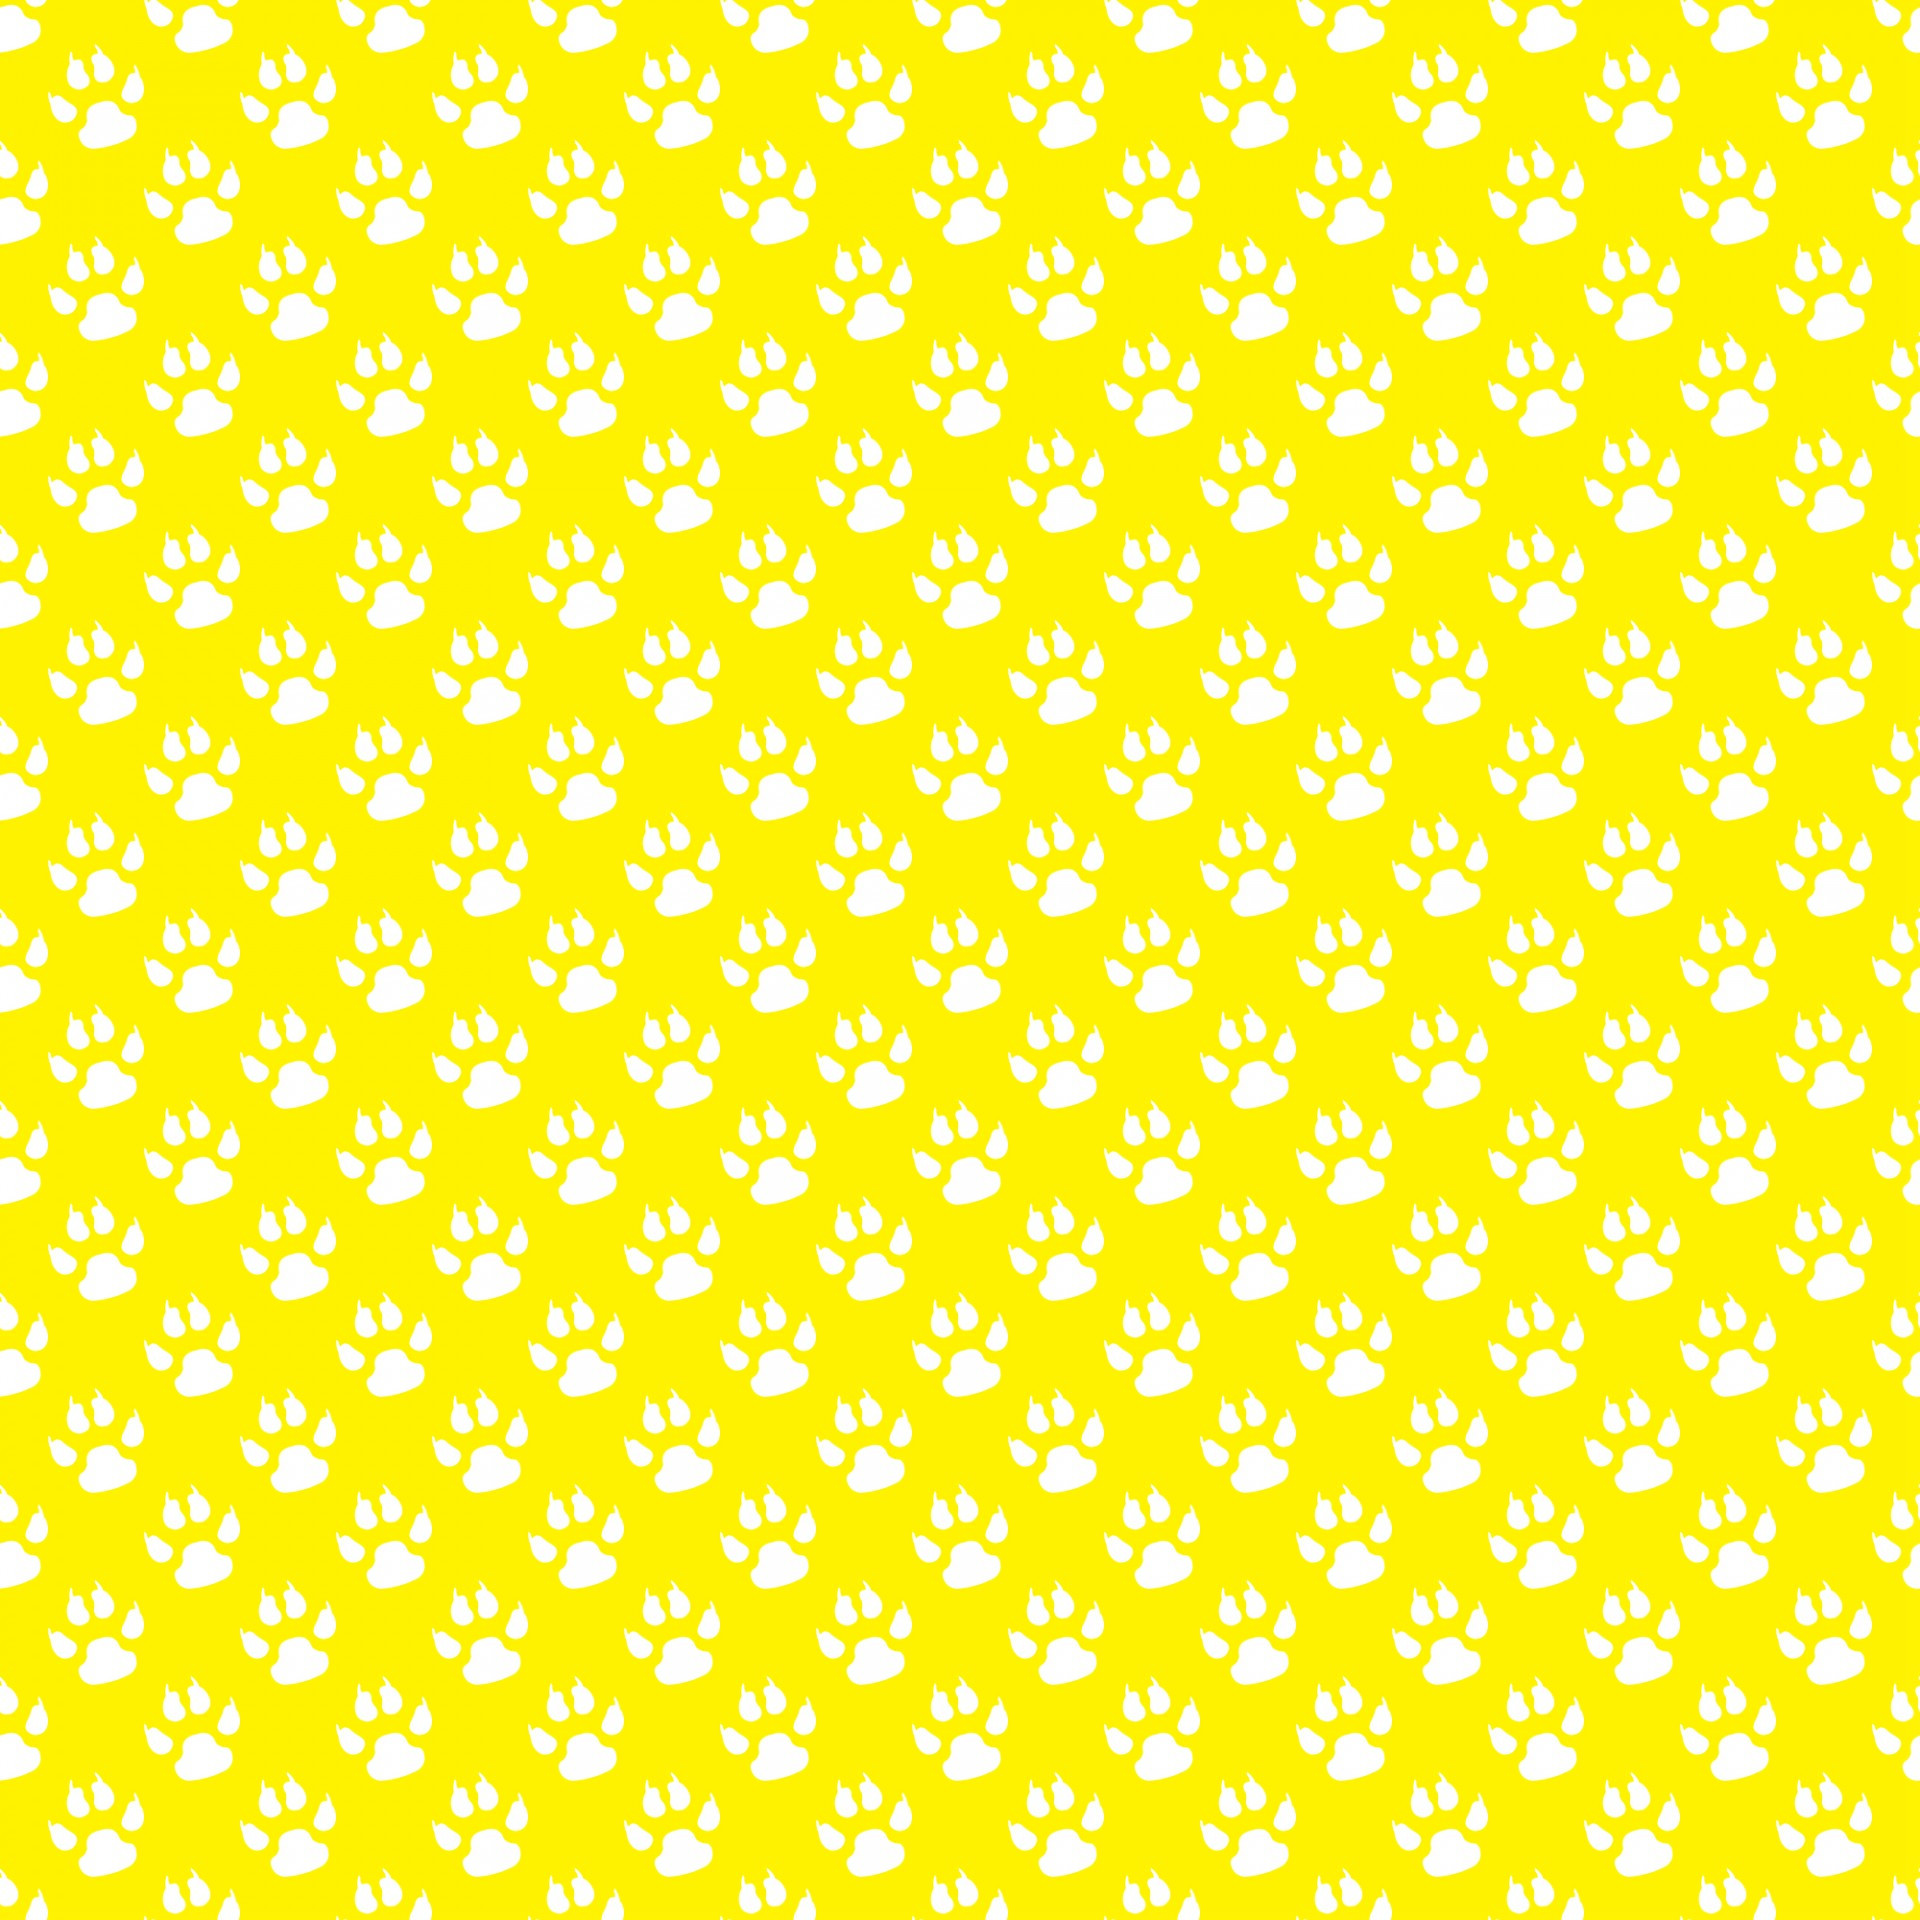 1920x1920 Yellow paw print background or wallpaper